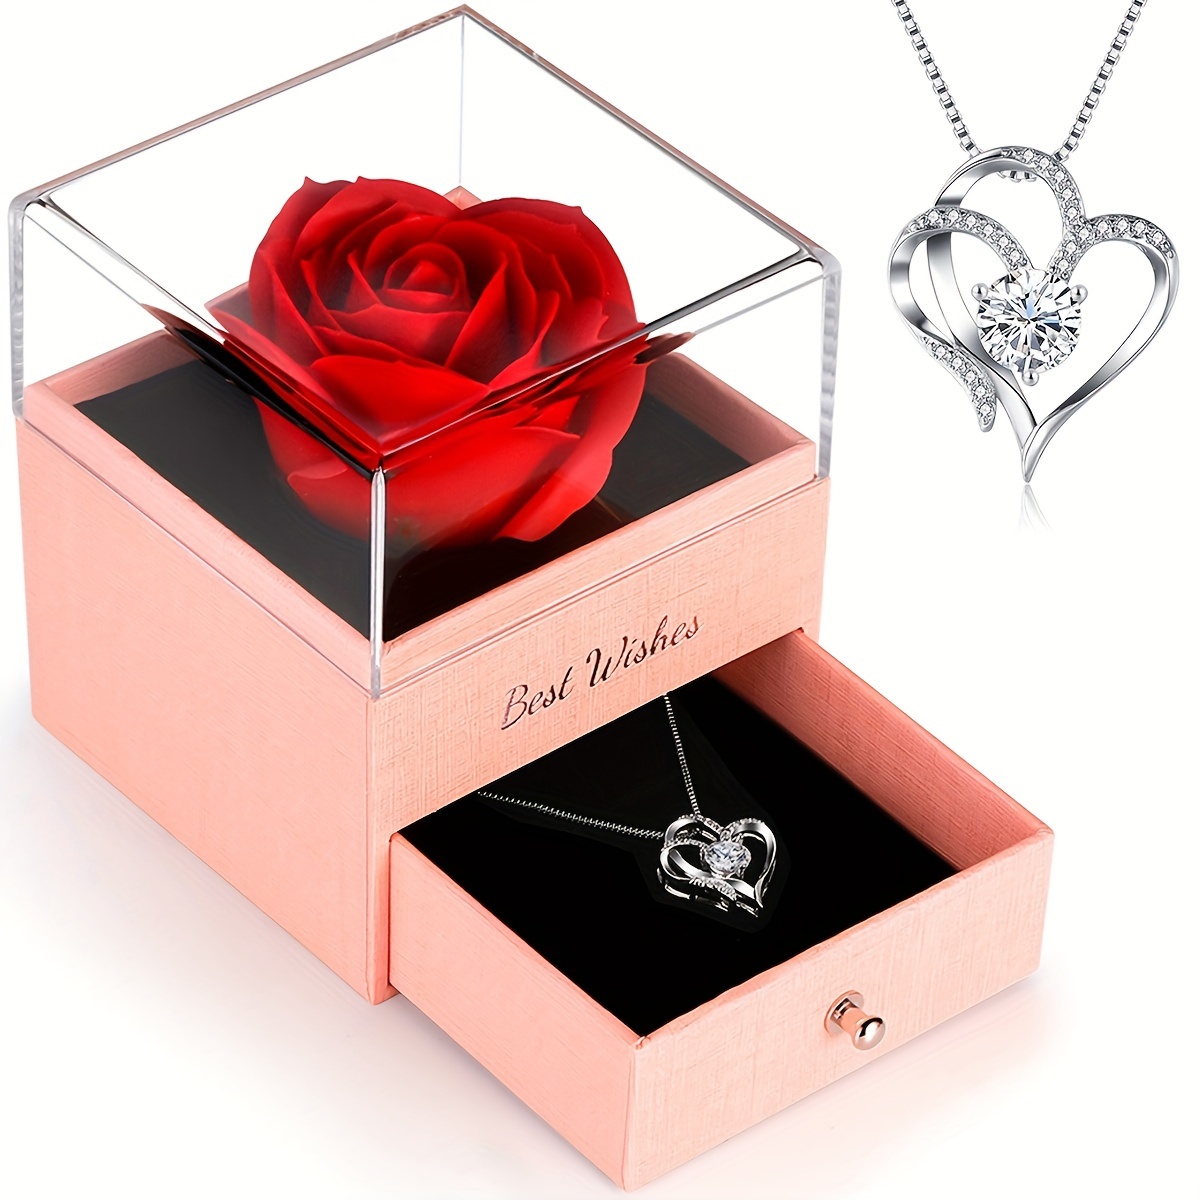 red rose love heart necklace with gift card and gift box perfect gifts for women mom girlfriend wife or her for valentines day anniversary birthday christmas or mothers day from daughter or son